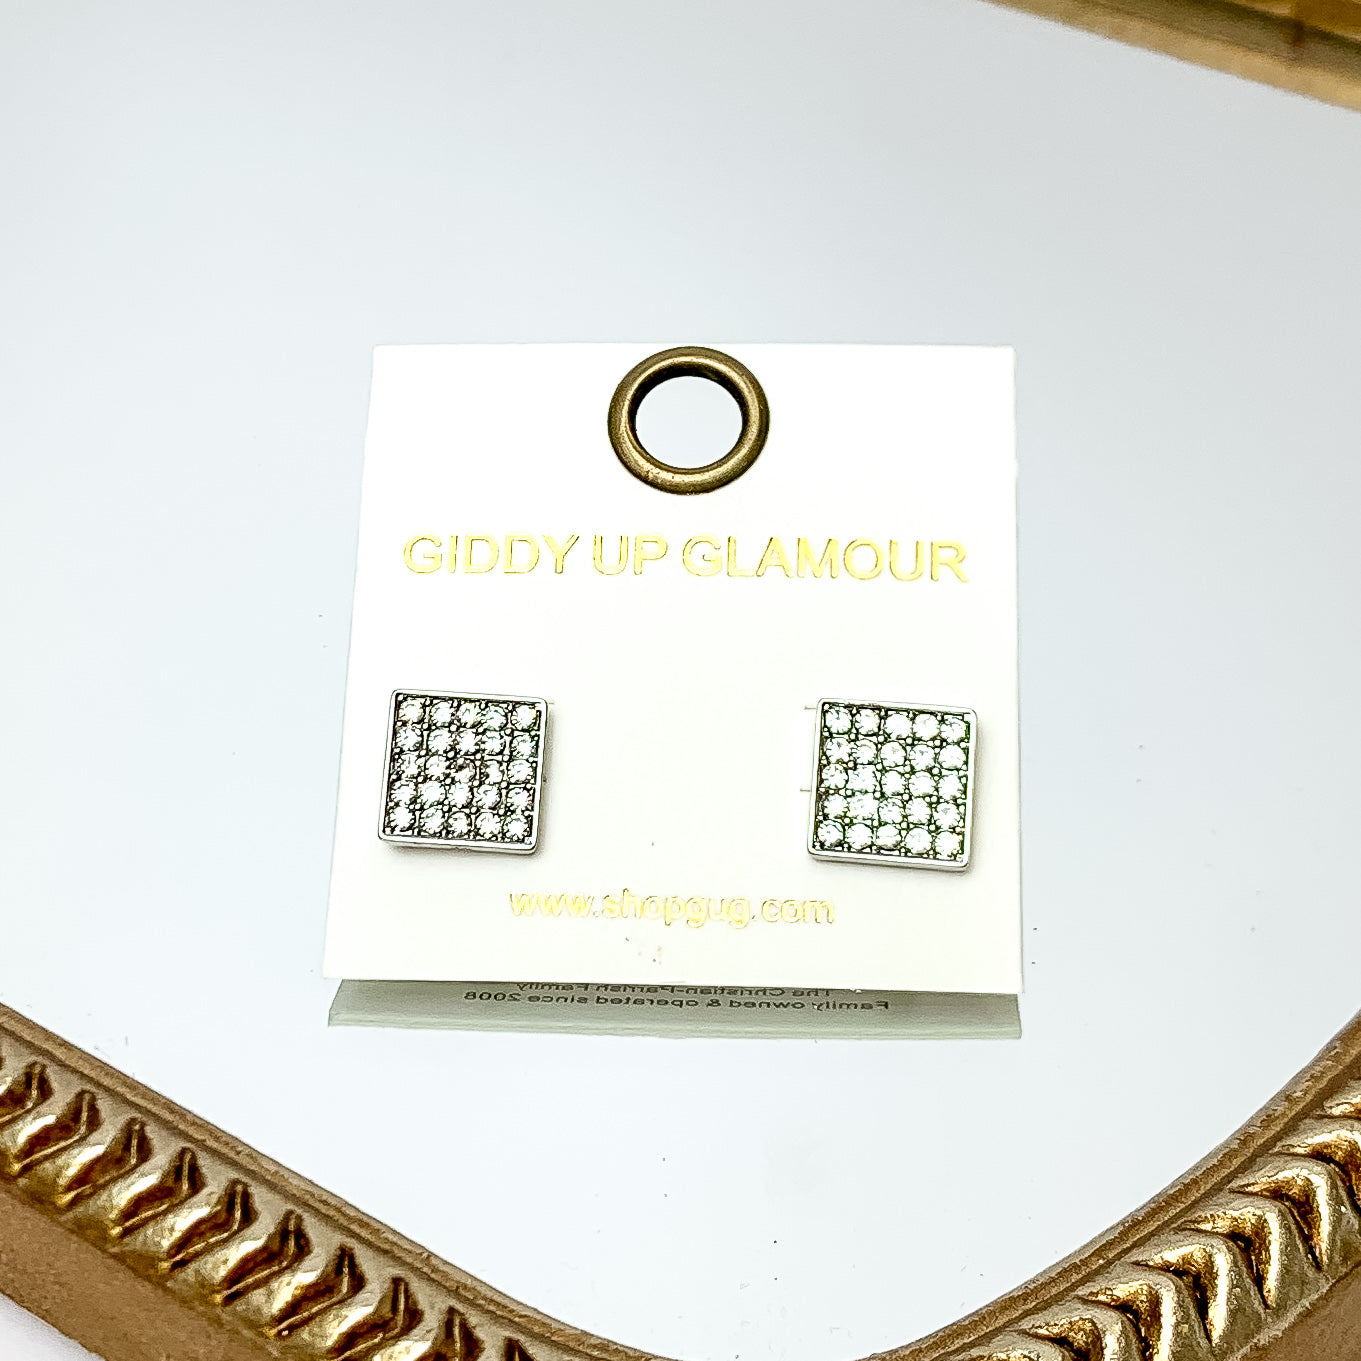 Square Clear Crystal Stud Earrings in Silver Tone. These earrings are pictured on a white background with a gold frame around.